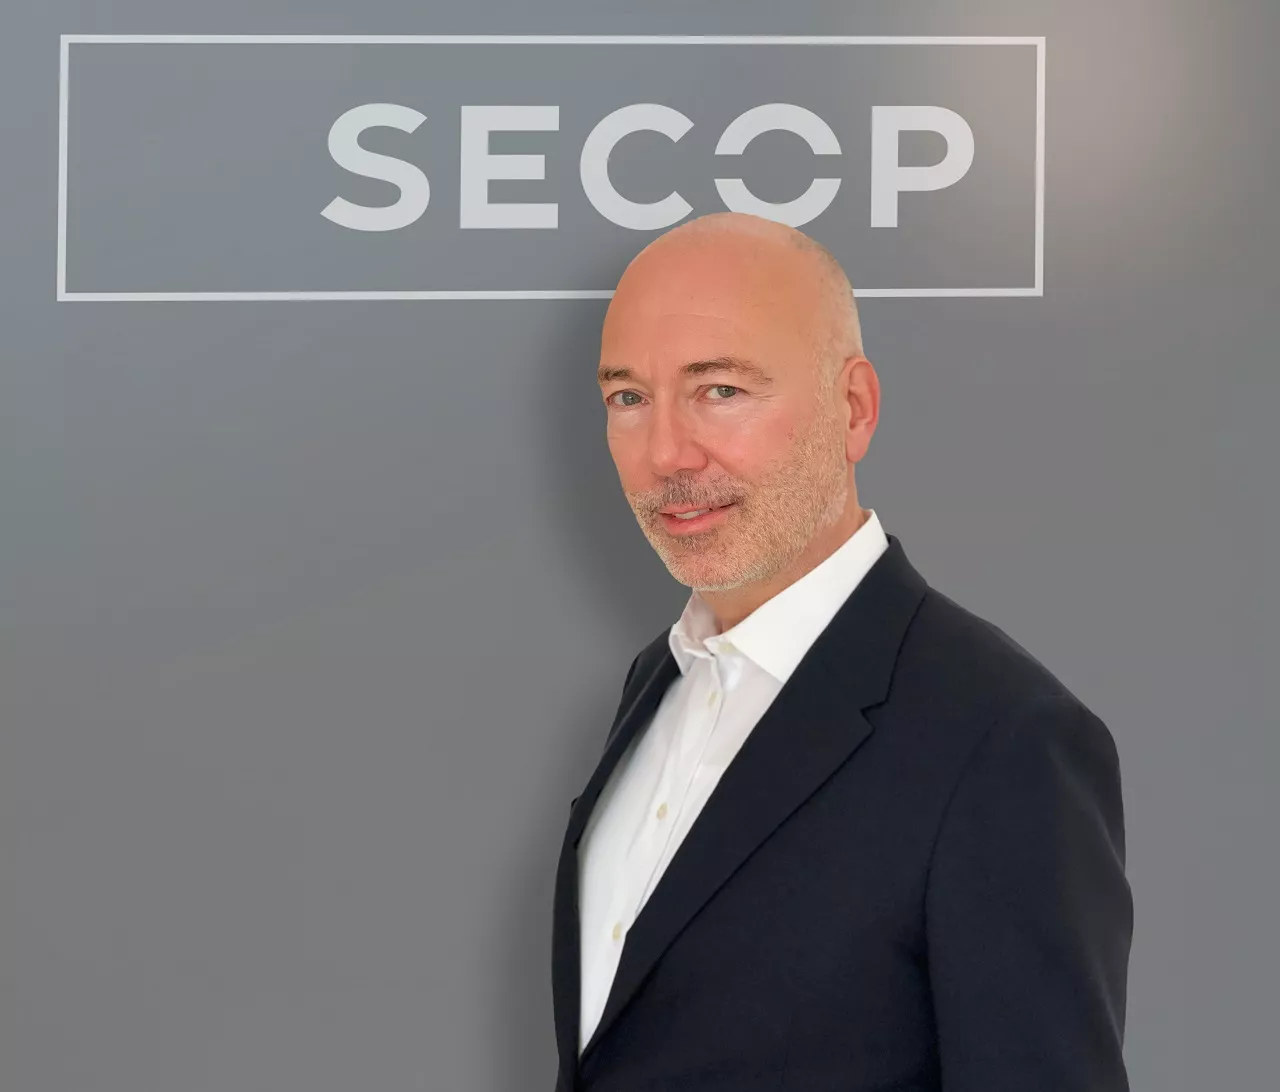 Secop GmbH has appointed Dr. Andreas J. Schmid as the new Group CEO